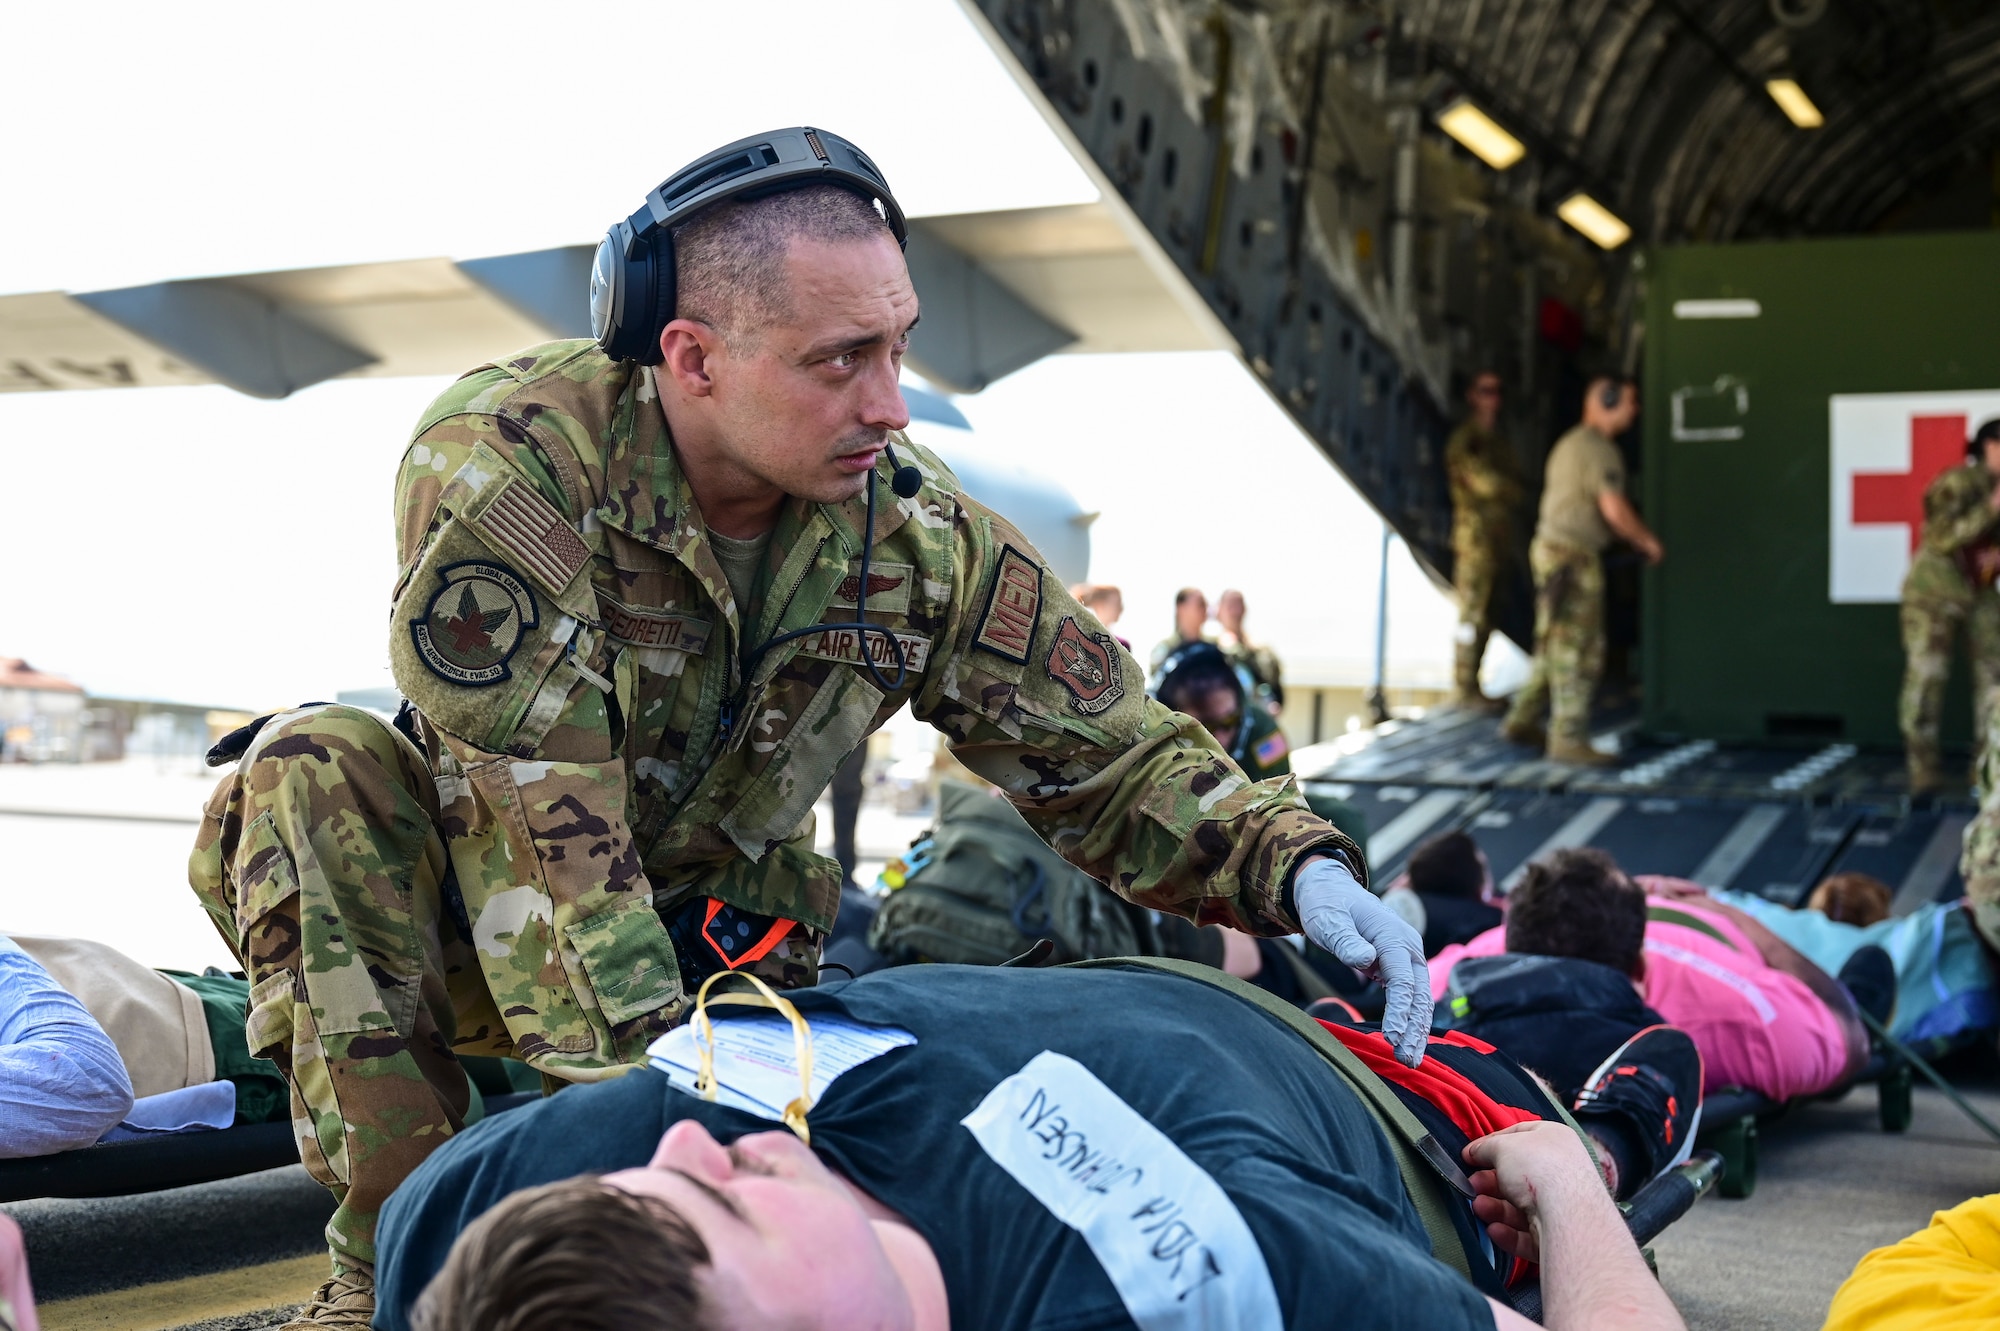 An Airman in a camo flight suit kneels on the ground at the back of an open C-17 Globemaster III as he attends to a patient on a stretcher.